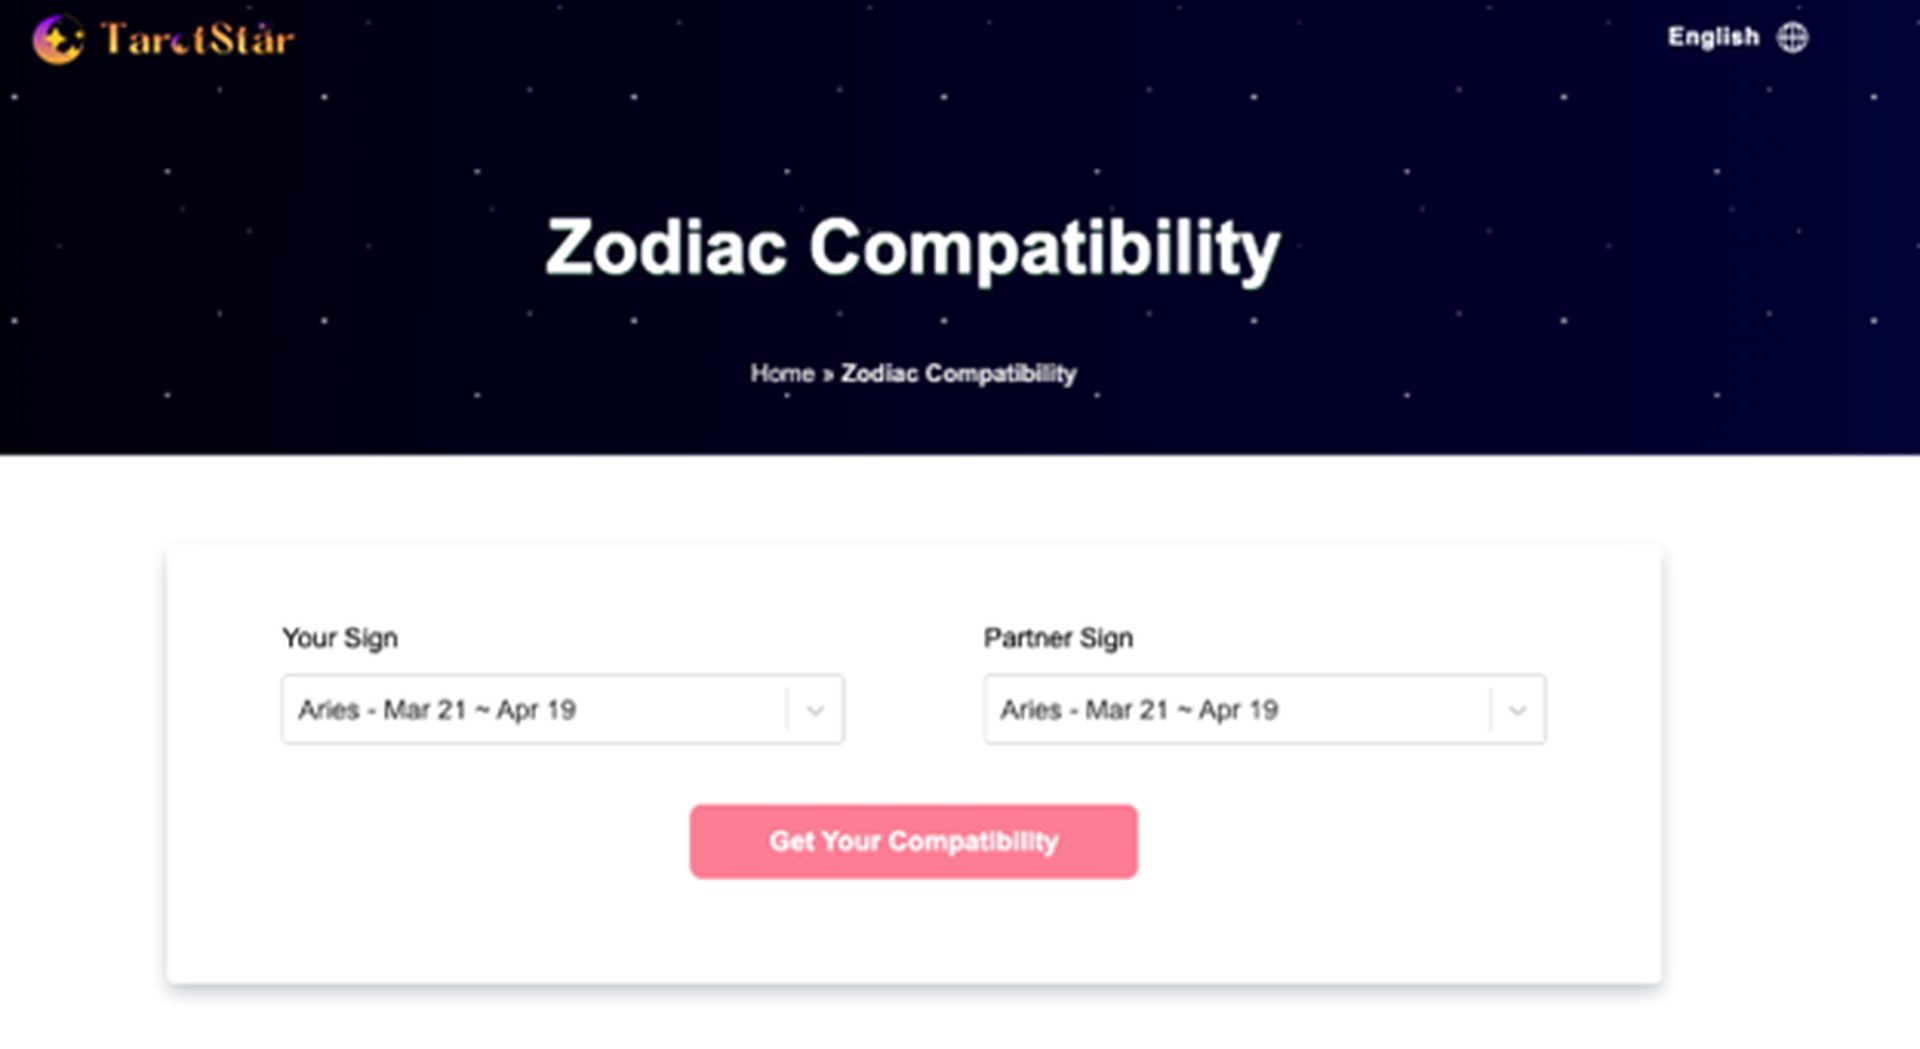 Try out these love meter tests by name and zodiac signs